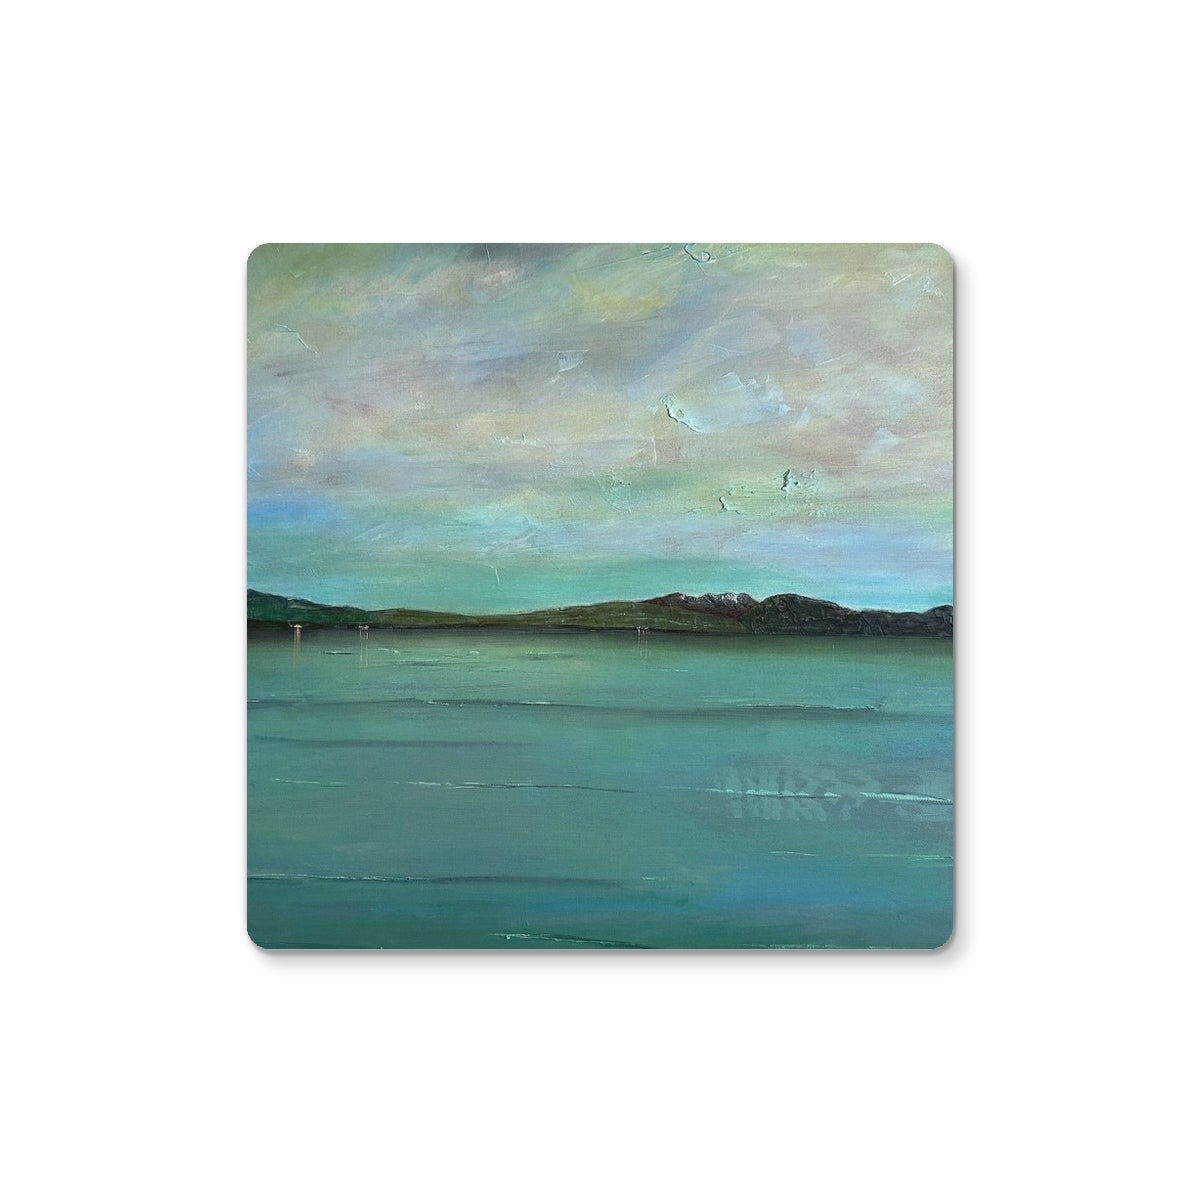 An Ethereal Loch Lomond Art Gifts Coaster-Coasters-Scottish Lochs & Mountains Art Gallery-Single Coaster-Paintings, Prints, Homeware, Art Gifts From Scotland By Scottish Artist Kevin Hunter